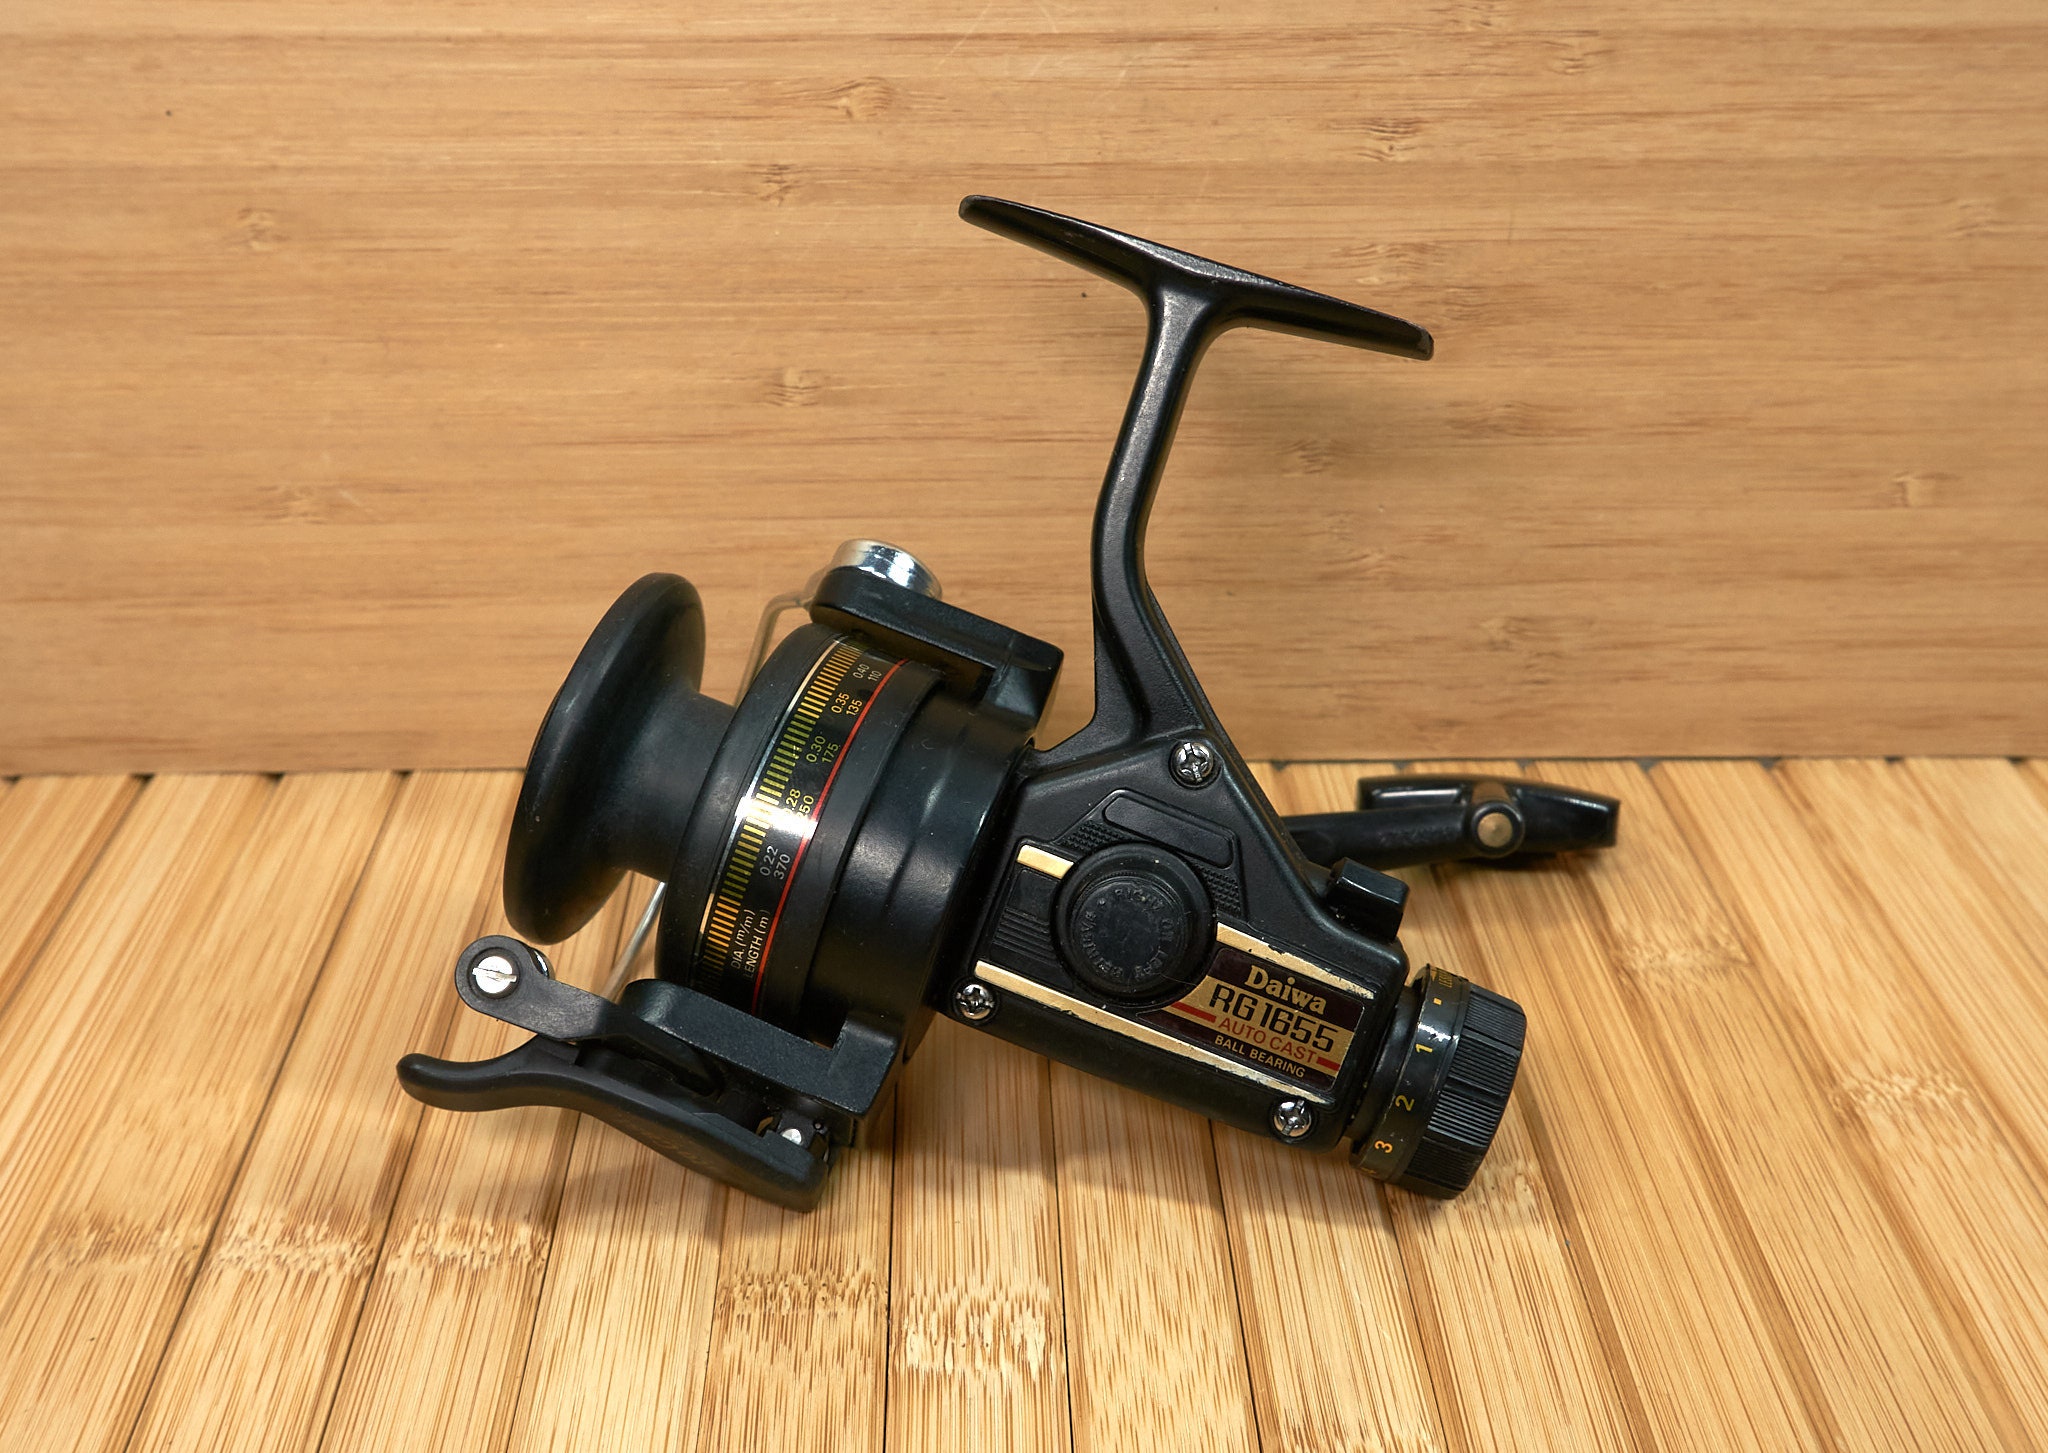 Vintage DAIWA RG 1655 Auto Cast Spinning Fishing Reel, Made in Japan 